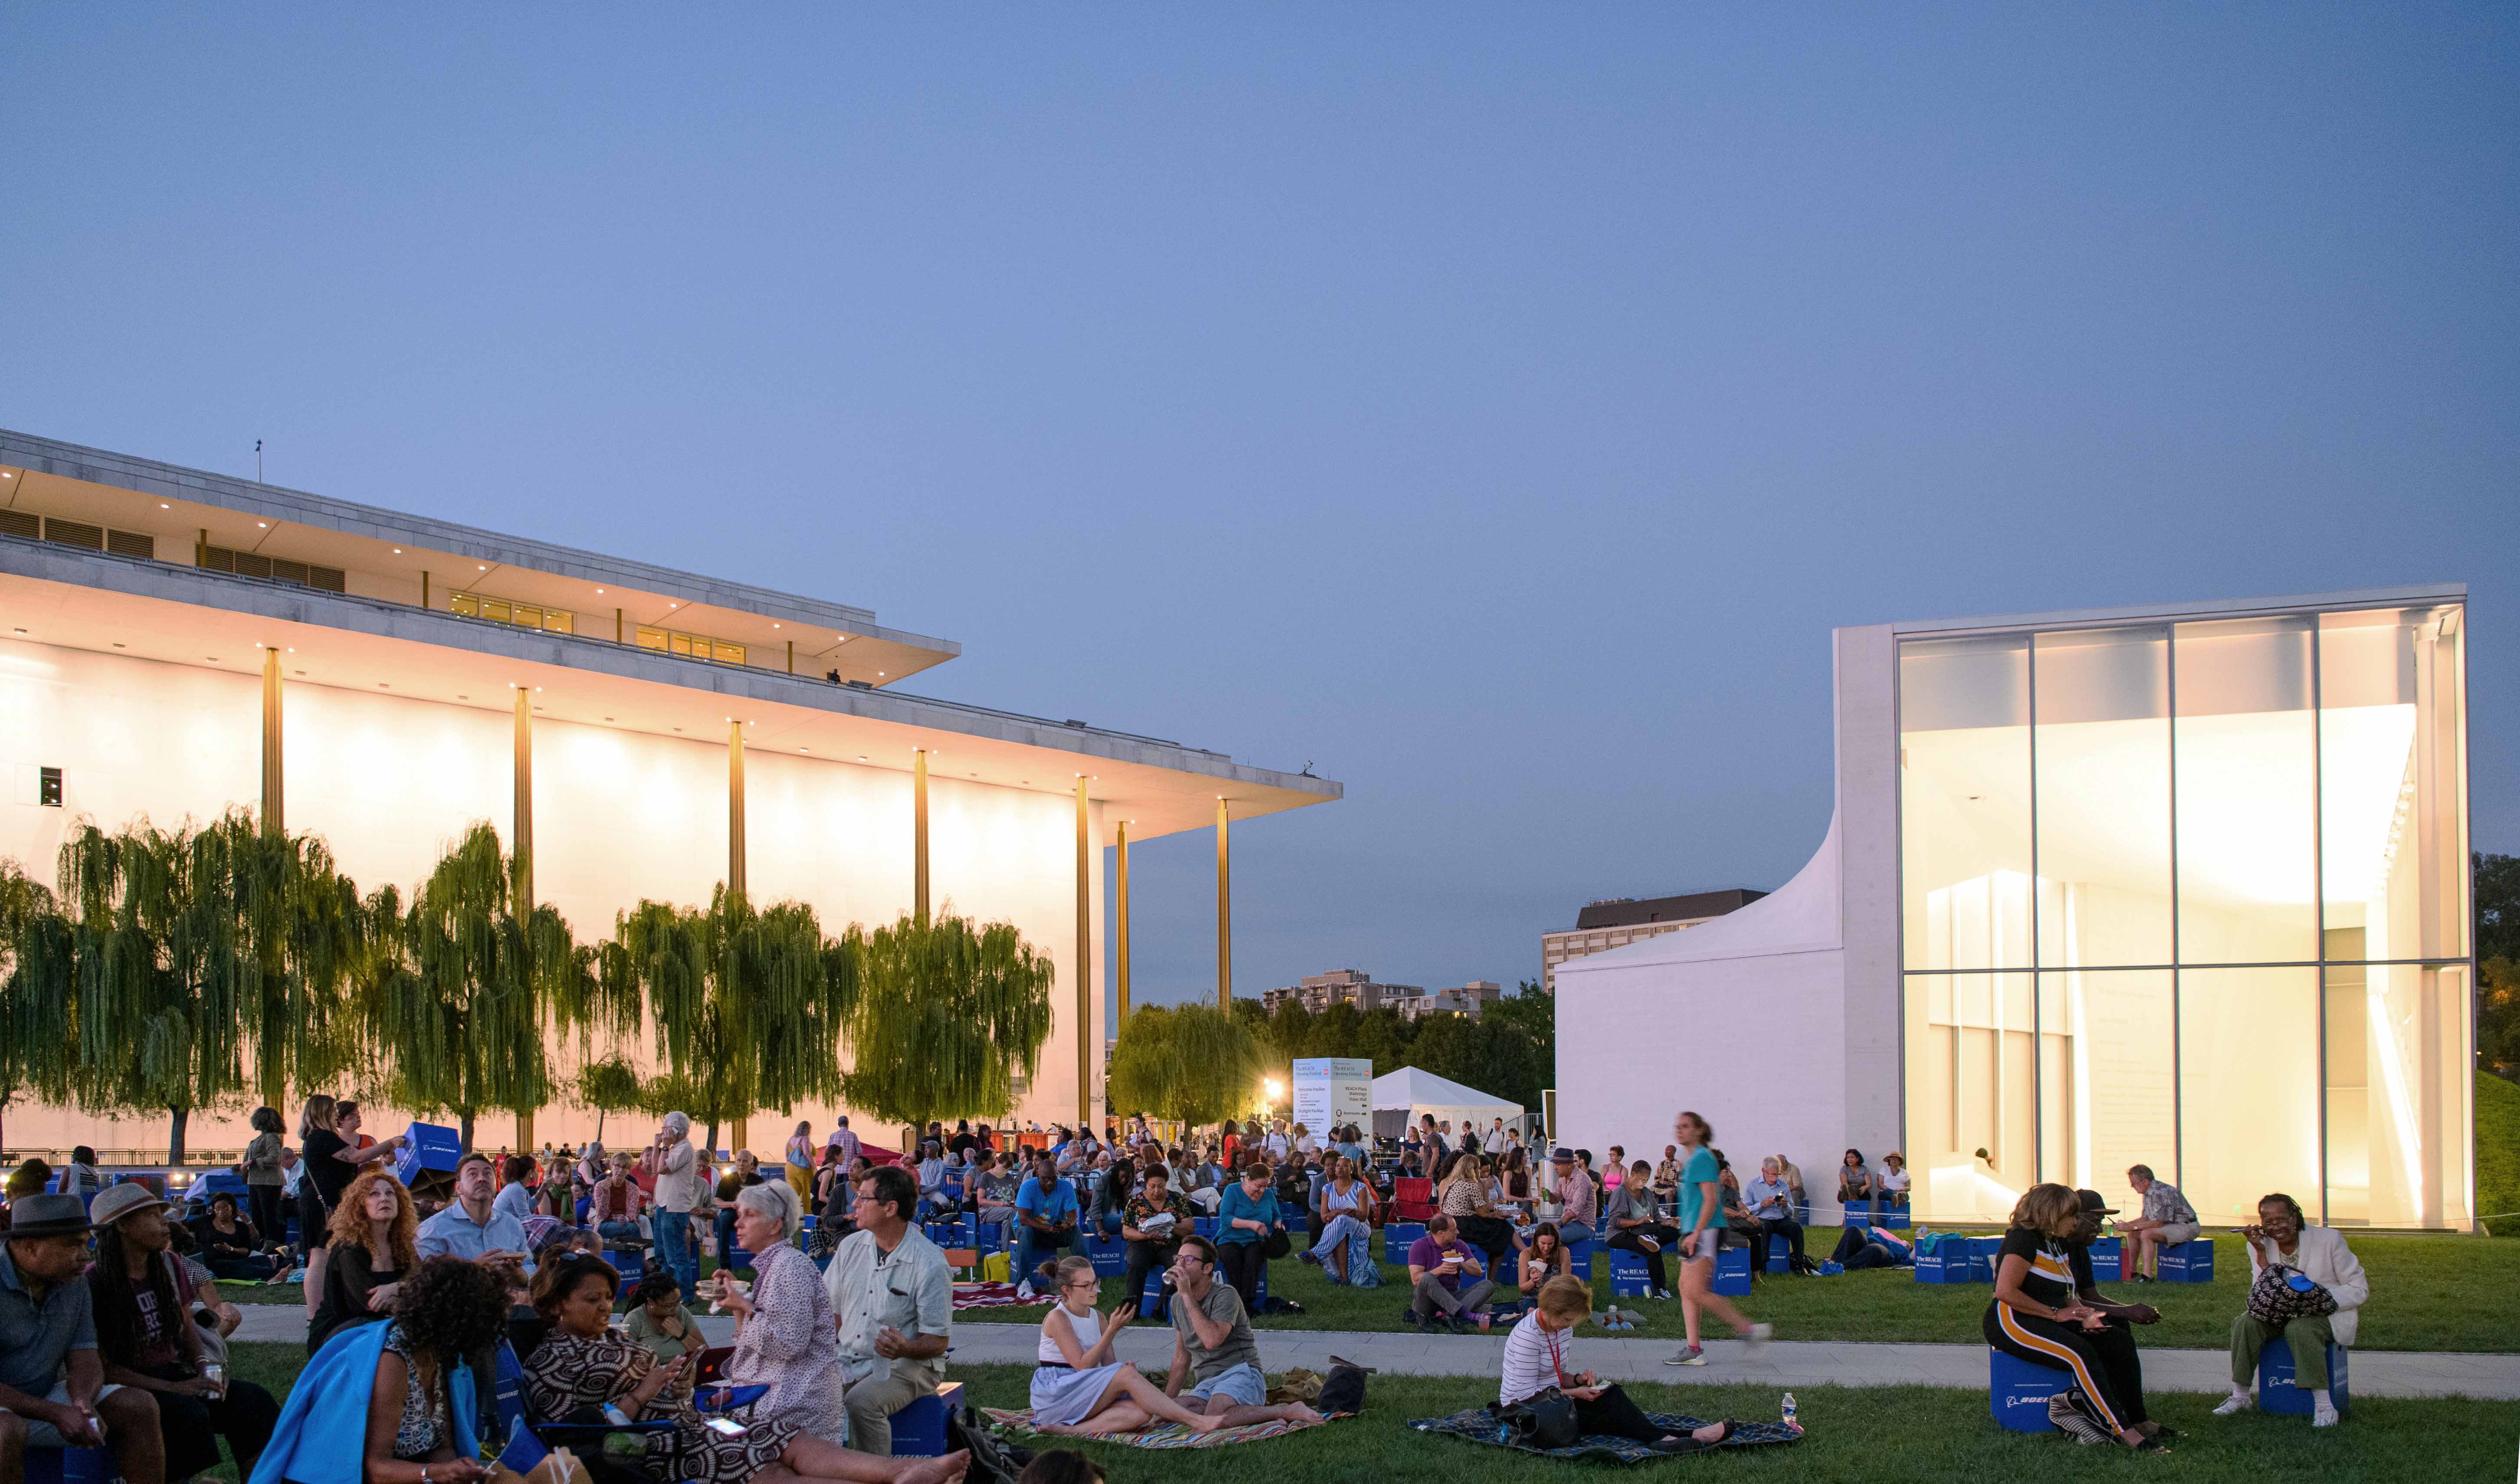 John f kennedy center for the performing arts jobs